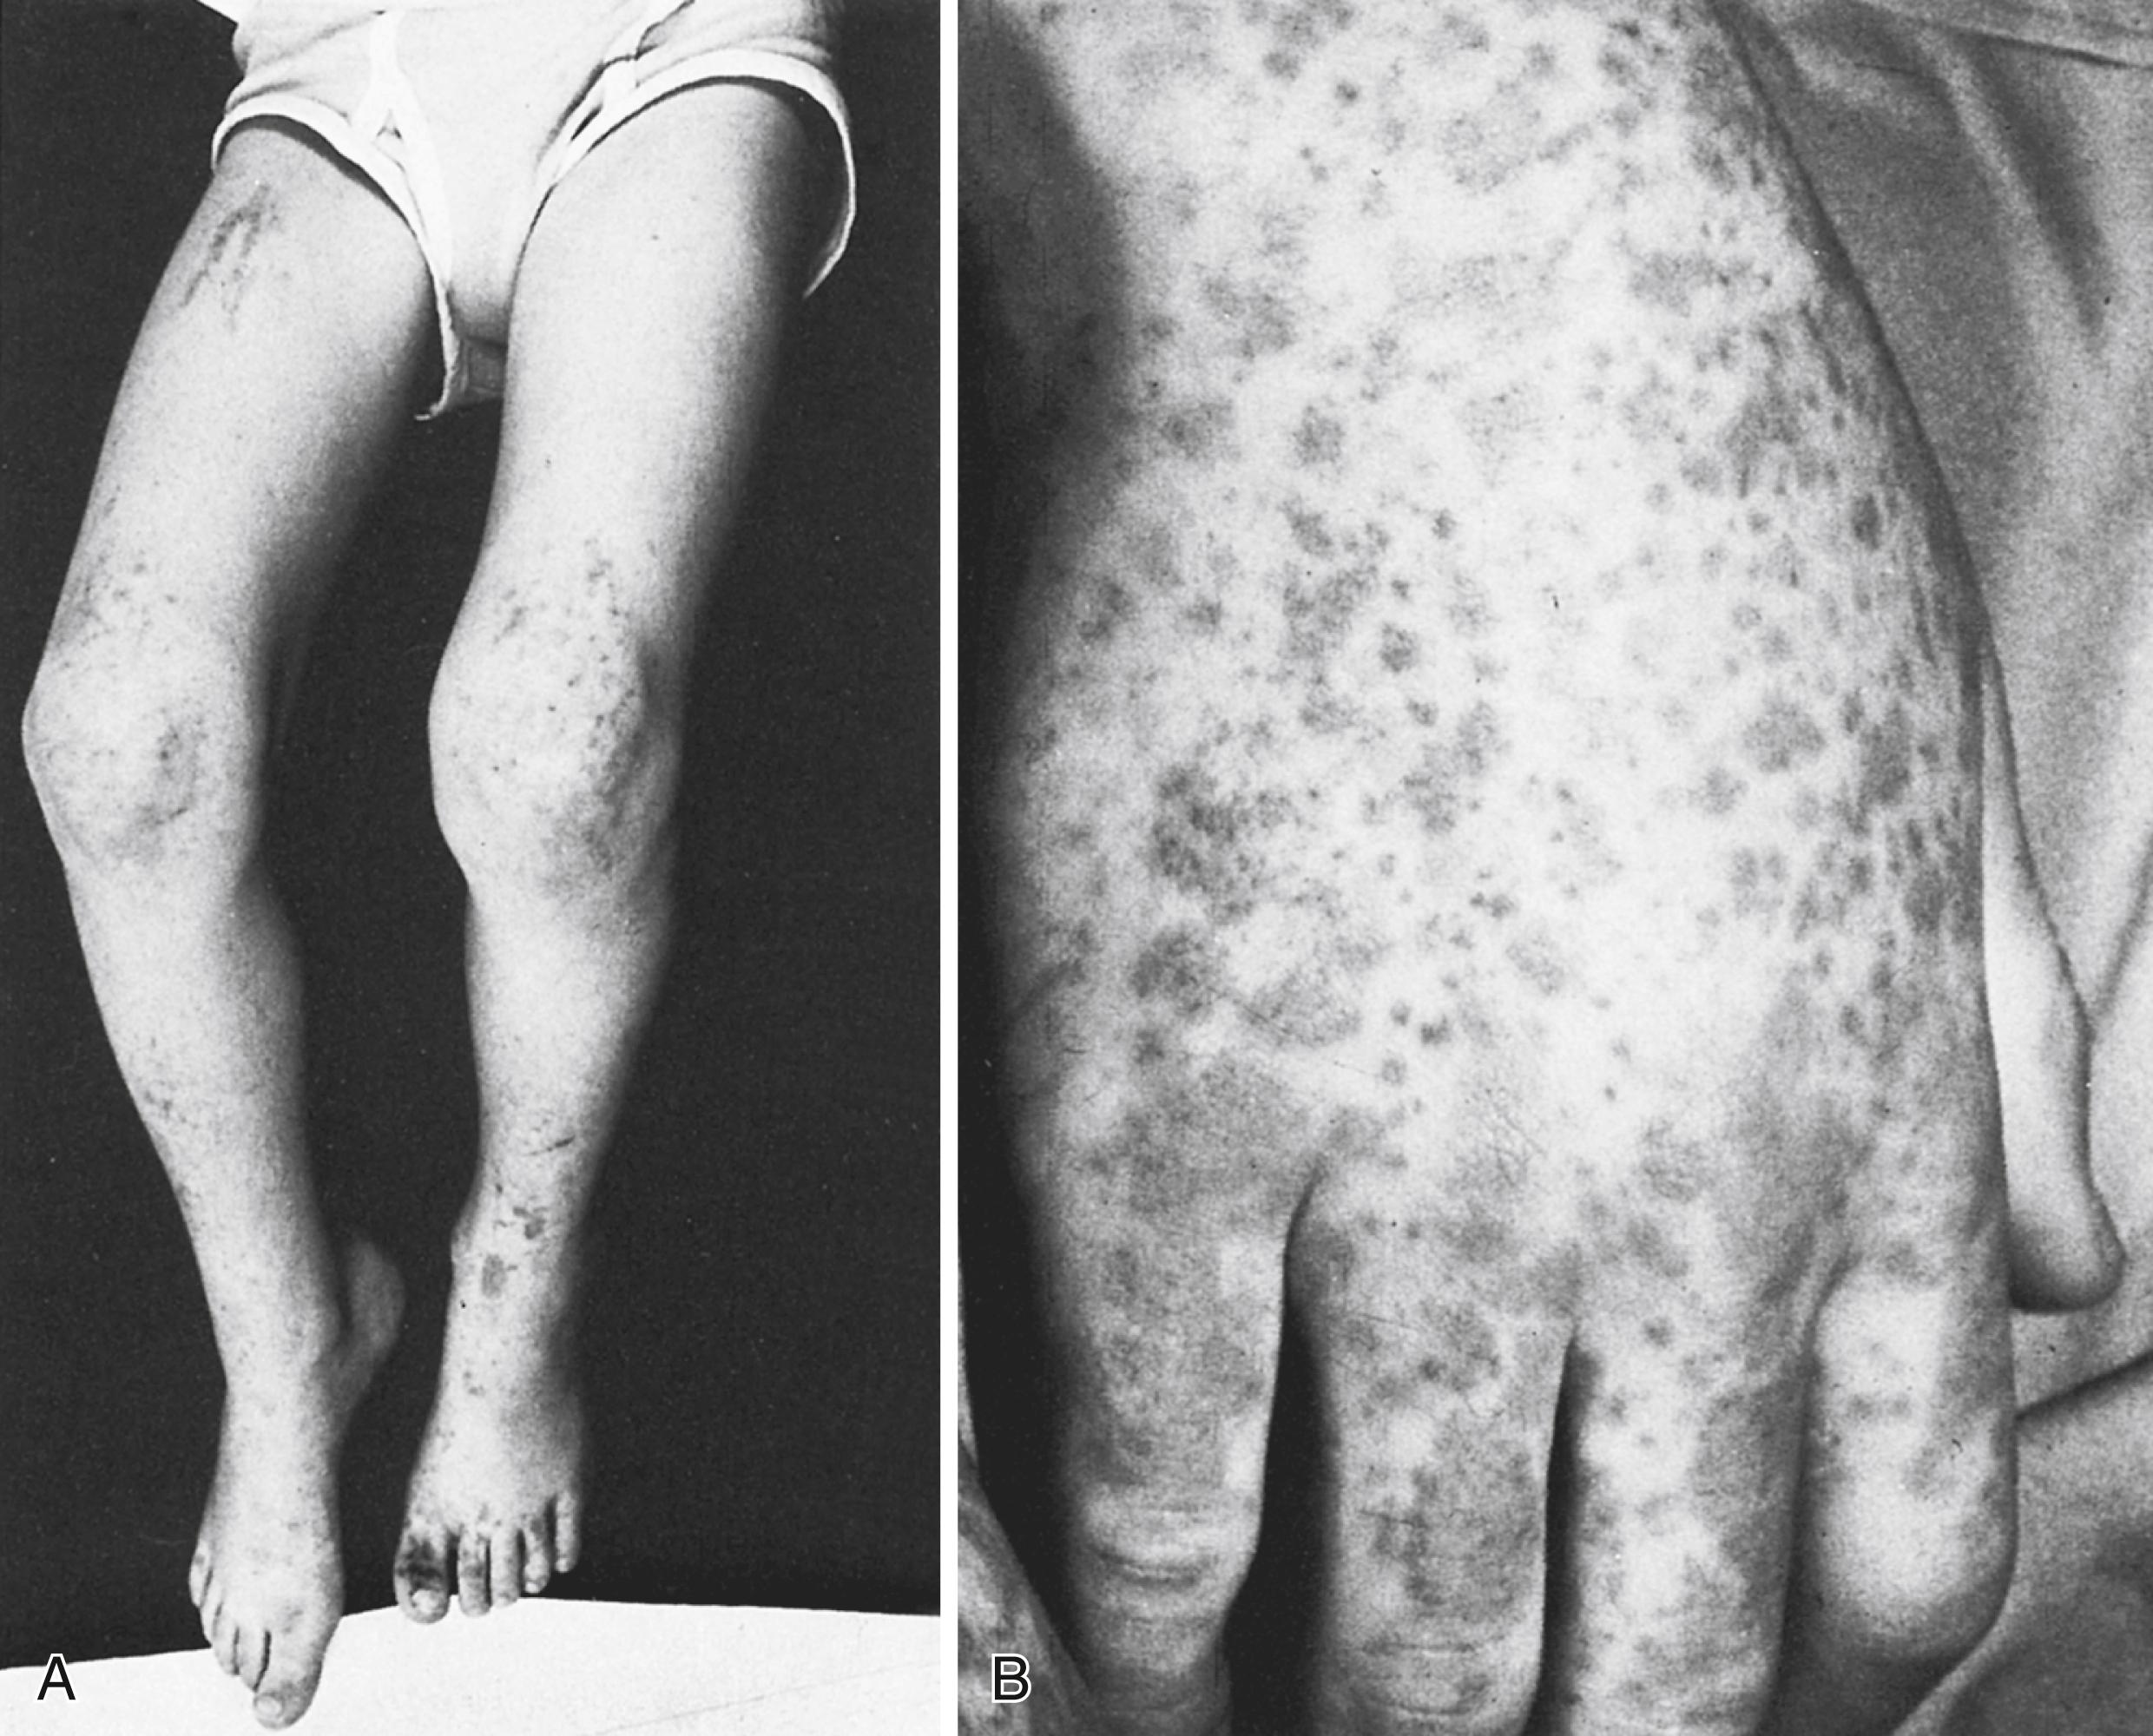 Fig. 33.2, IgA vasculitis. A , These purpuric lesions appeared on the lower extremities of a 10-year-old boy who had an acute, self-limited illness characterized by fever, arthritis, melena, and transient hematuria. Notice the periarticular swelling around the ankles and knees. B, Purpura on dorsum of the hand of a 14-year-old boy with IgA vasculitis.